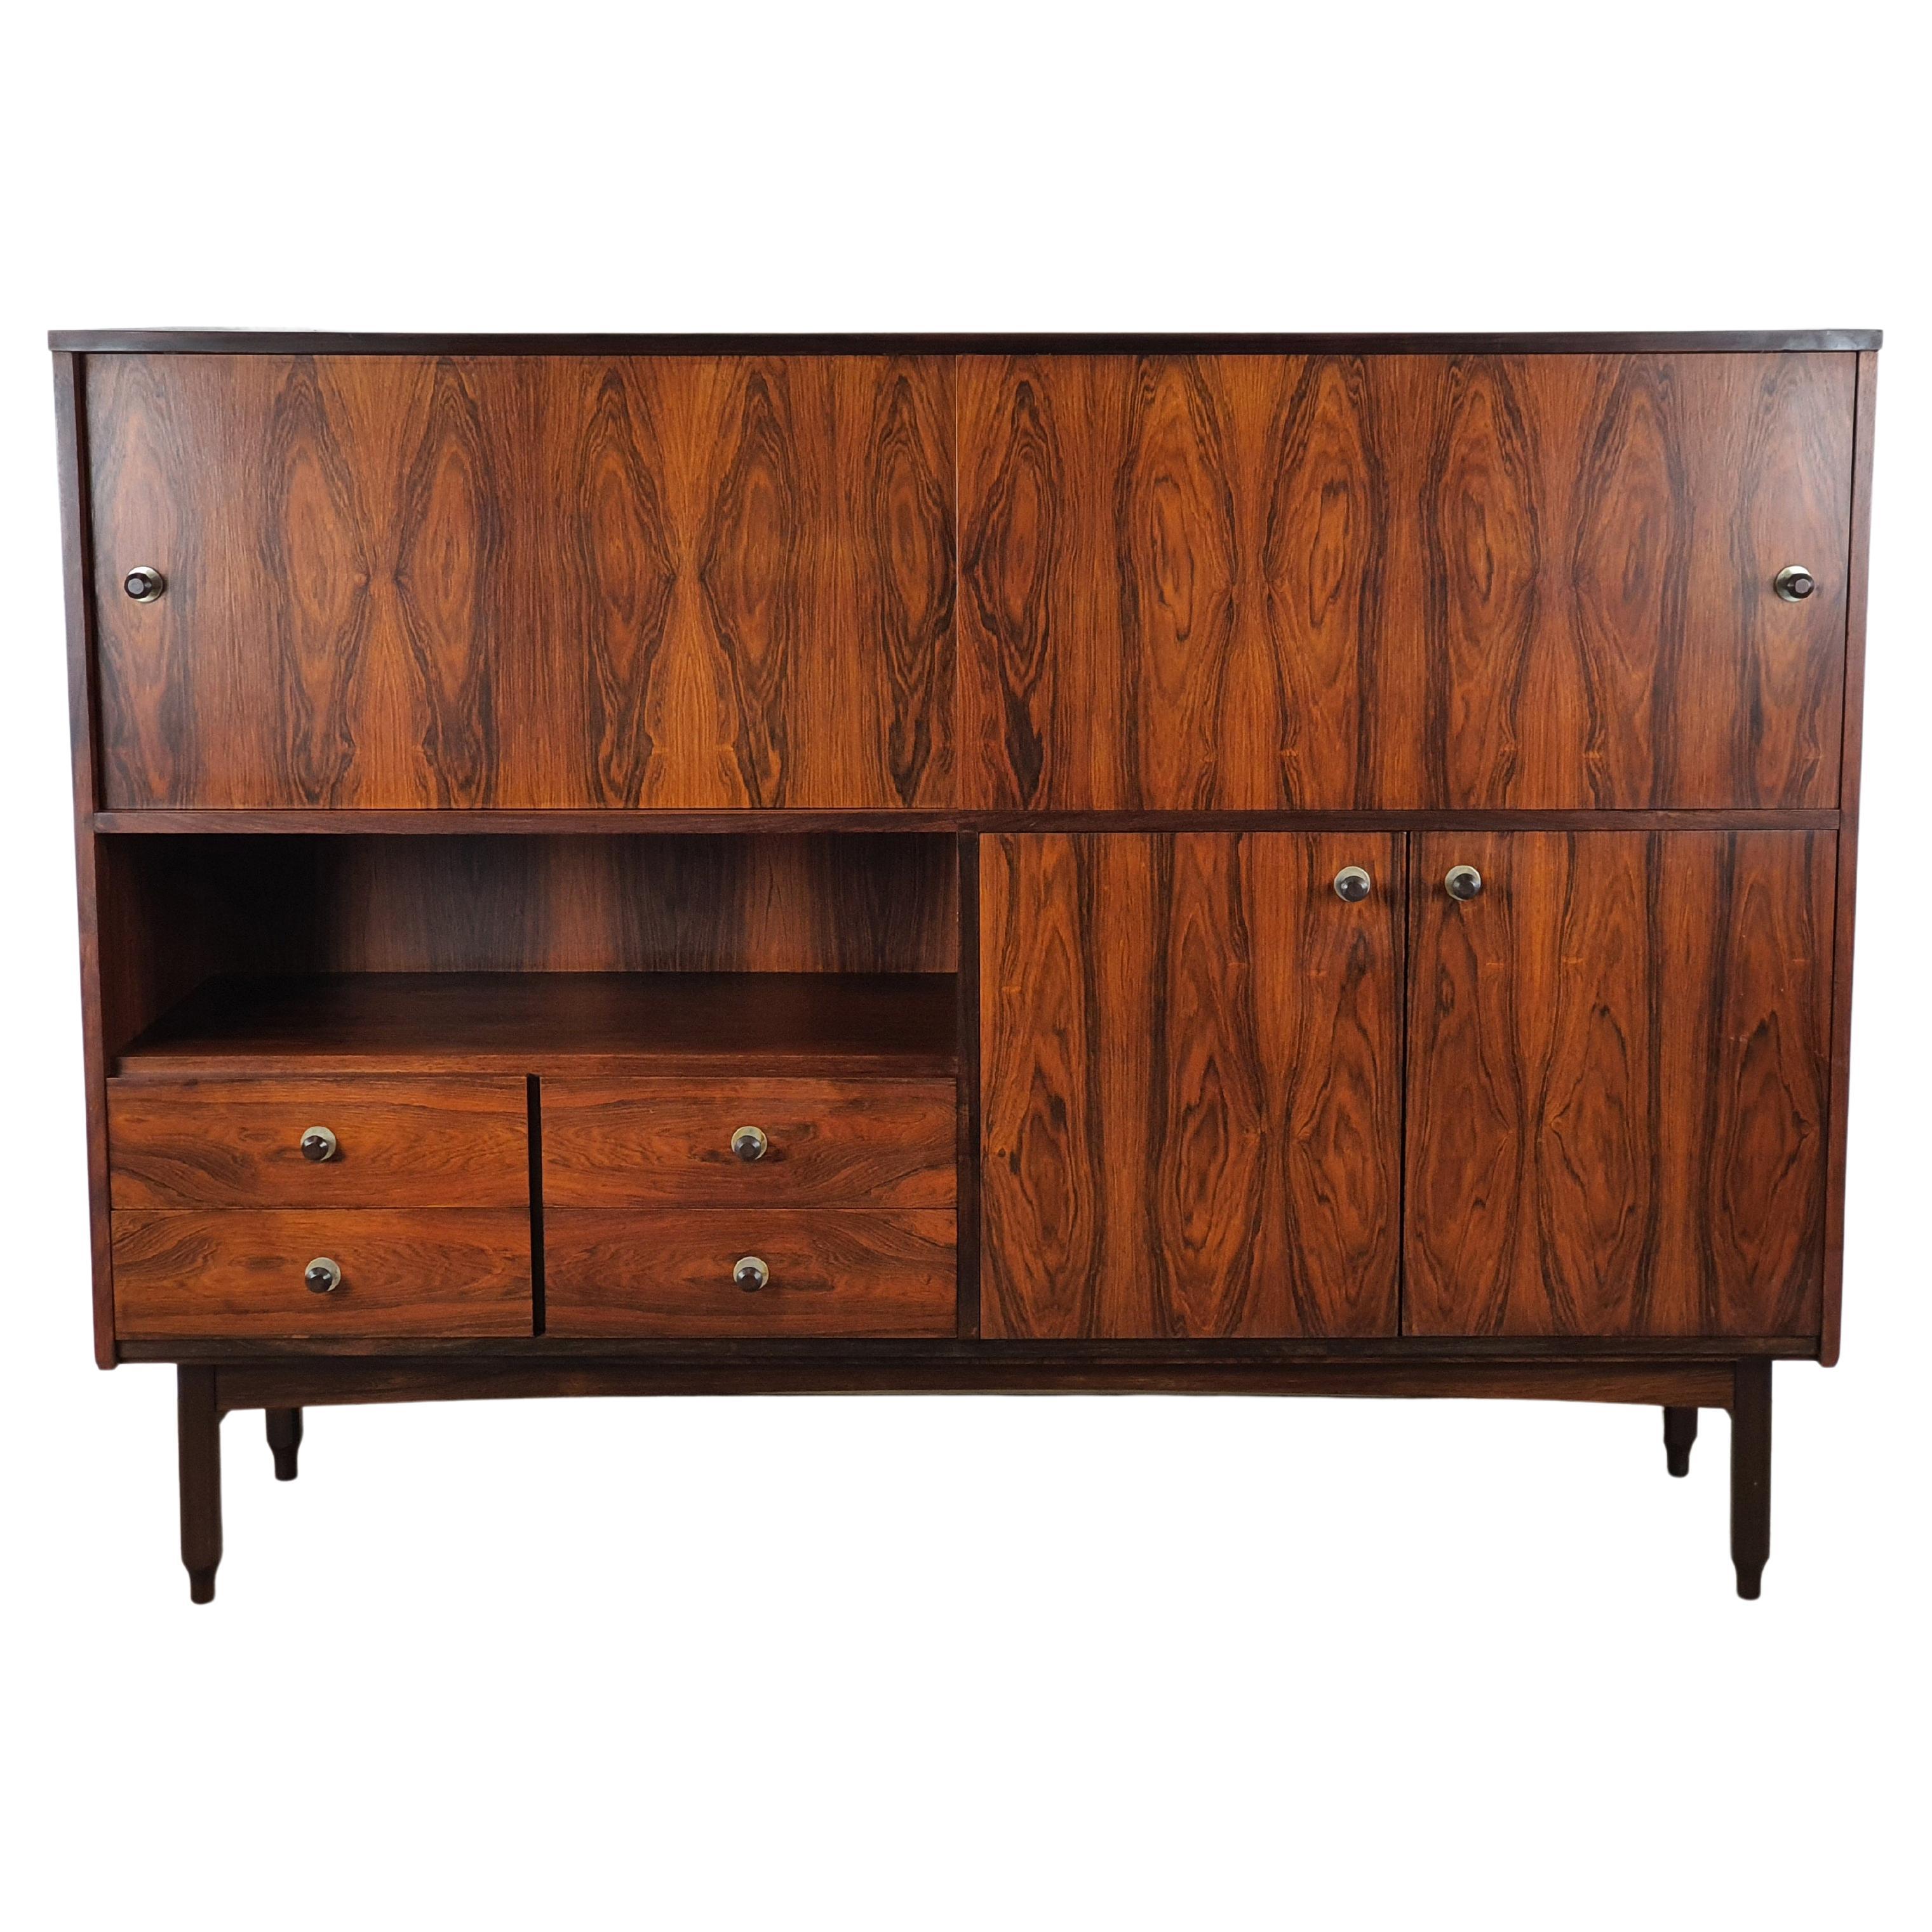 Scandinavian Style Sideboard by Ima Mobili, Vicenza with Sliding Doors For Sale